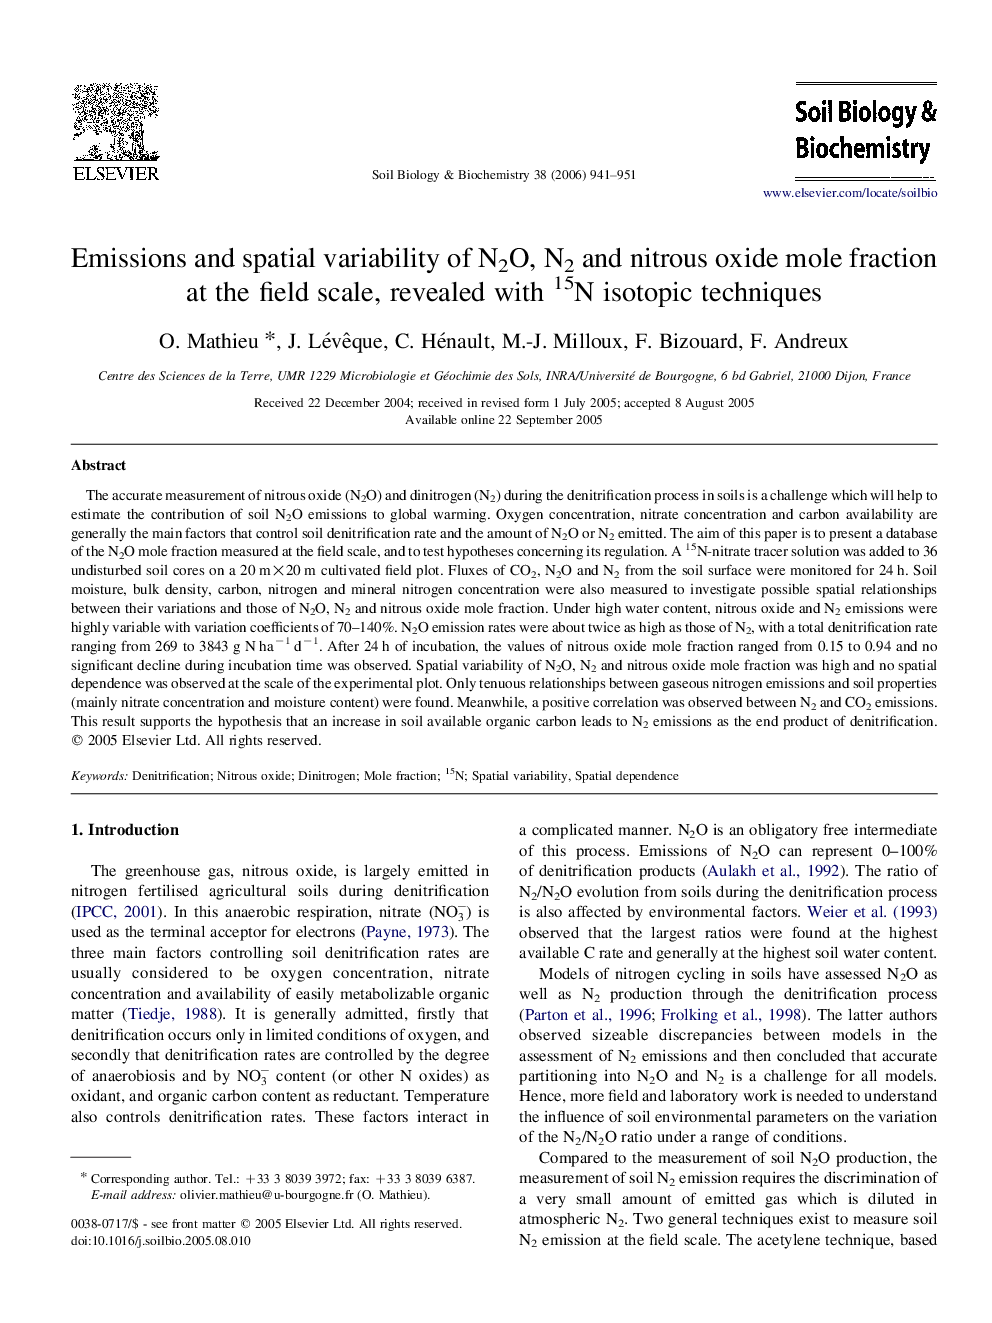 Emissions and spatial variability of N2O, N2 and nitrous oxide mole fraction at the field scale, revealed with 15N isotopic techniques